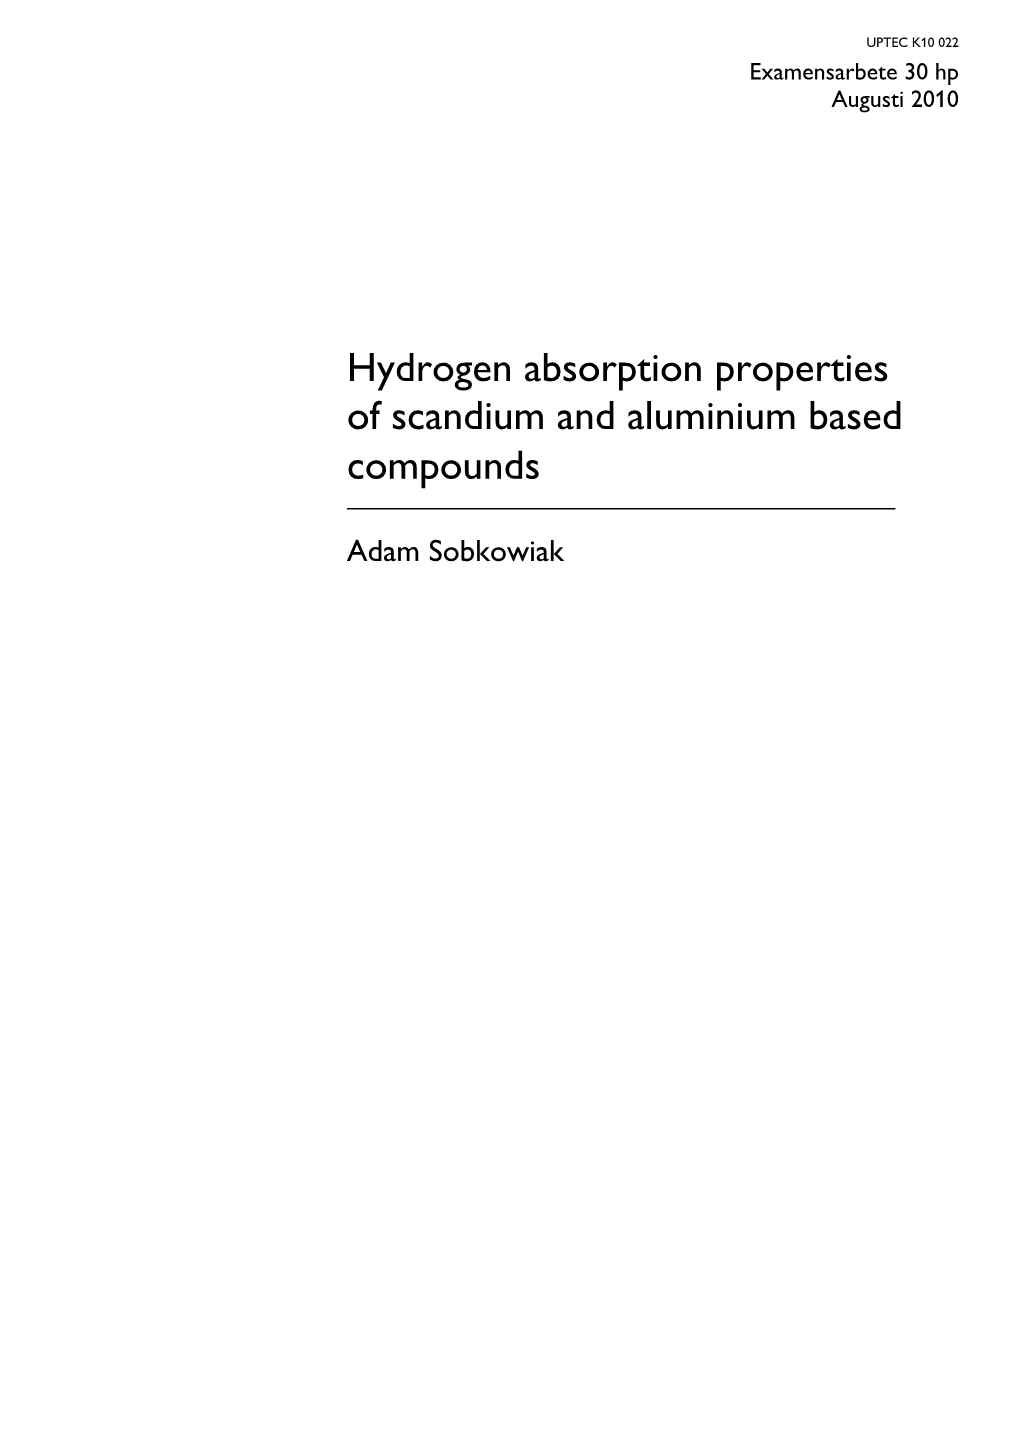 Hydrogen Absorption Properties of Scandium and Aluminium Based Compounds